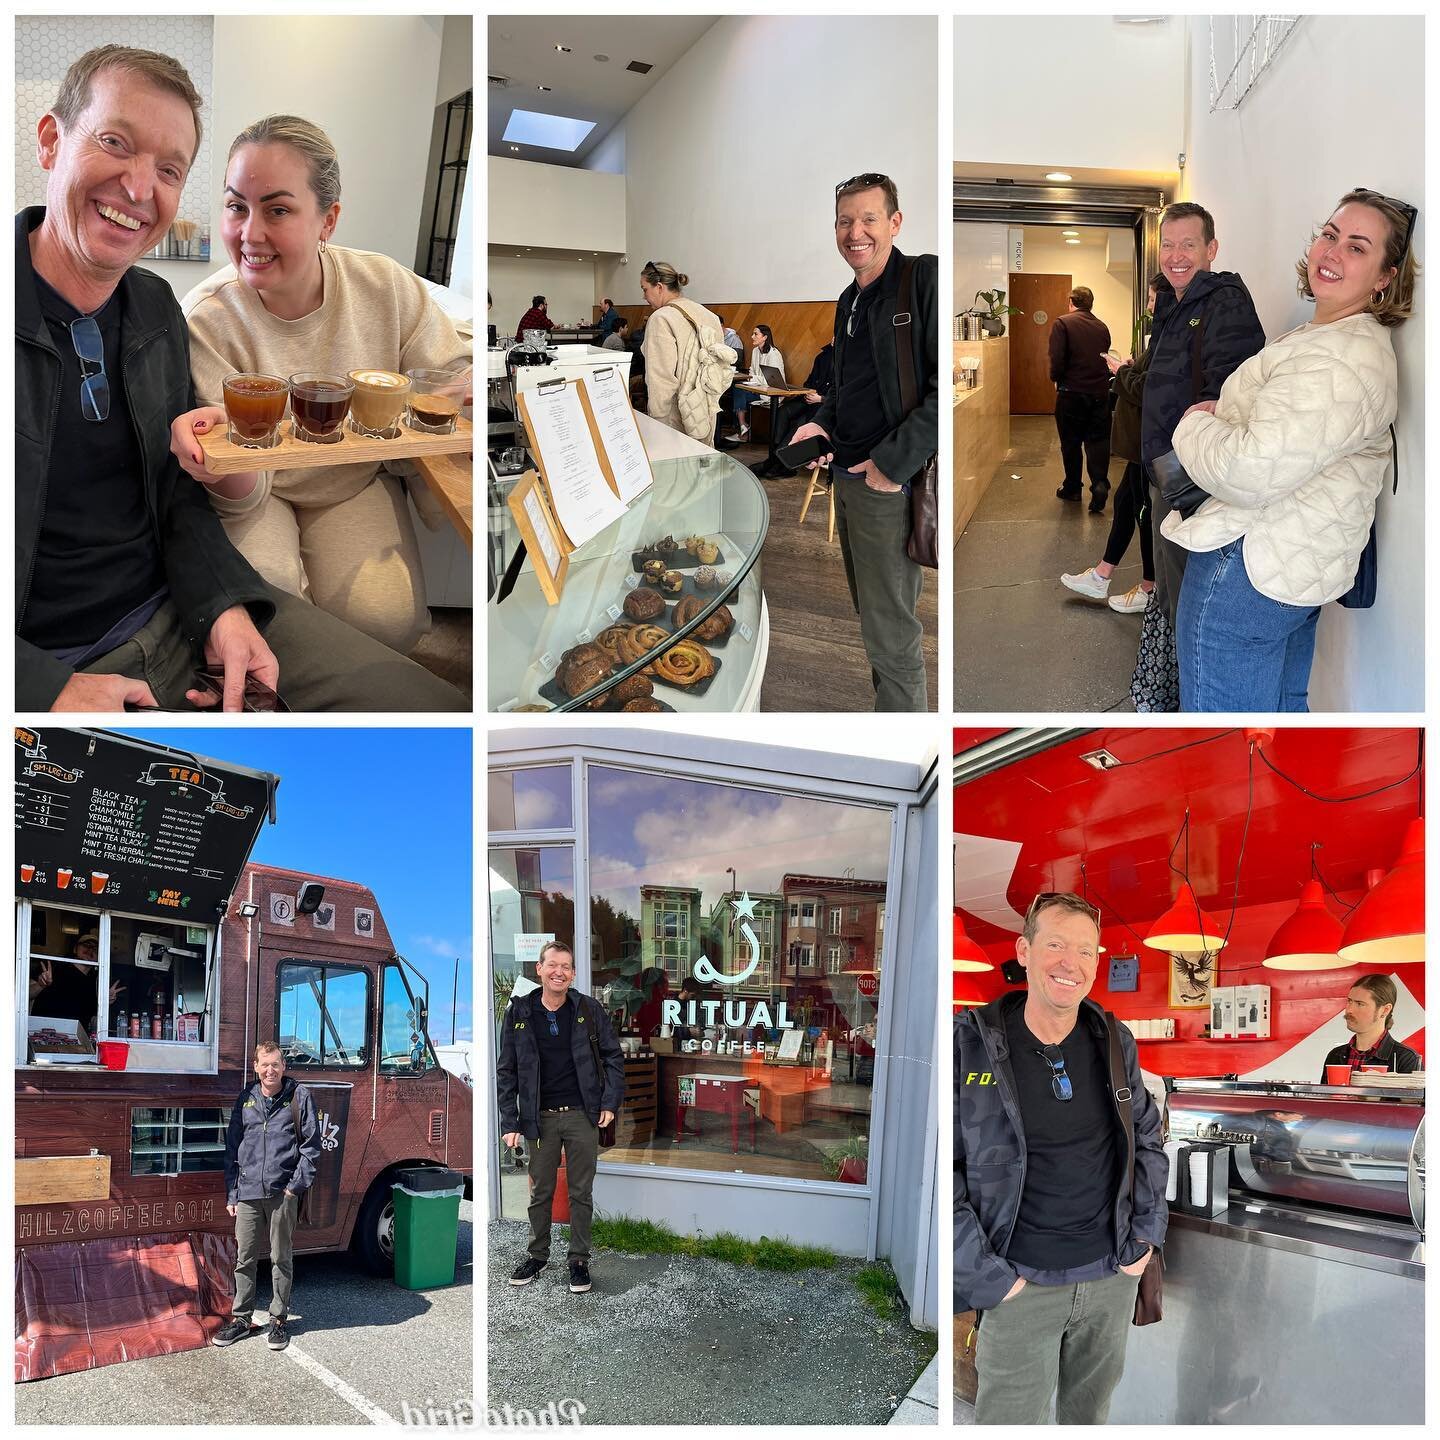 Do you want to know what I did when I went to San Francisco with @dr_susannah_graham and @drjamesfrench to visit @drannepeled and @peledsurgery ?
.
.
There was a lot of learning, some awesome food and drink, and a ton of laughs with our incredible ho